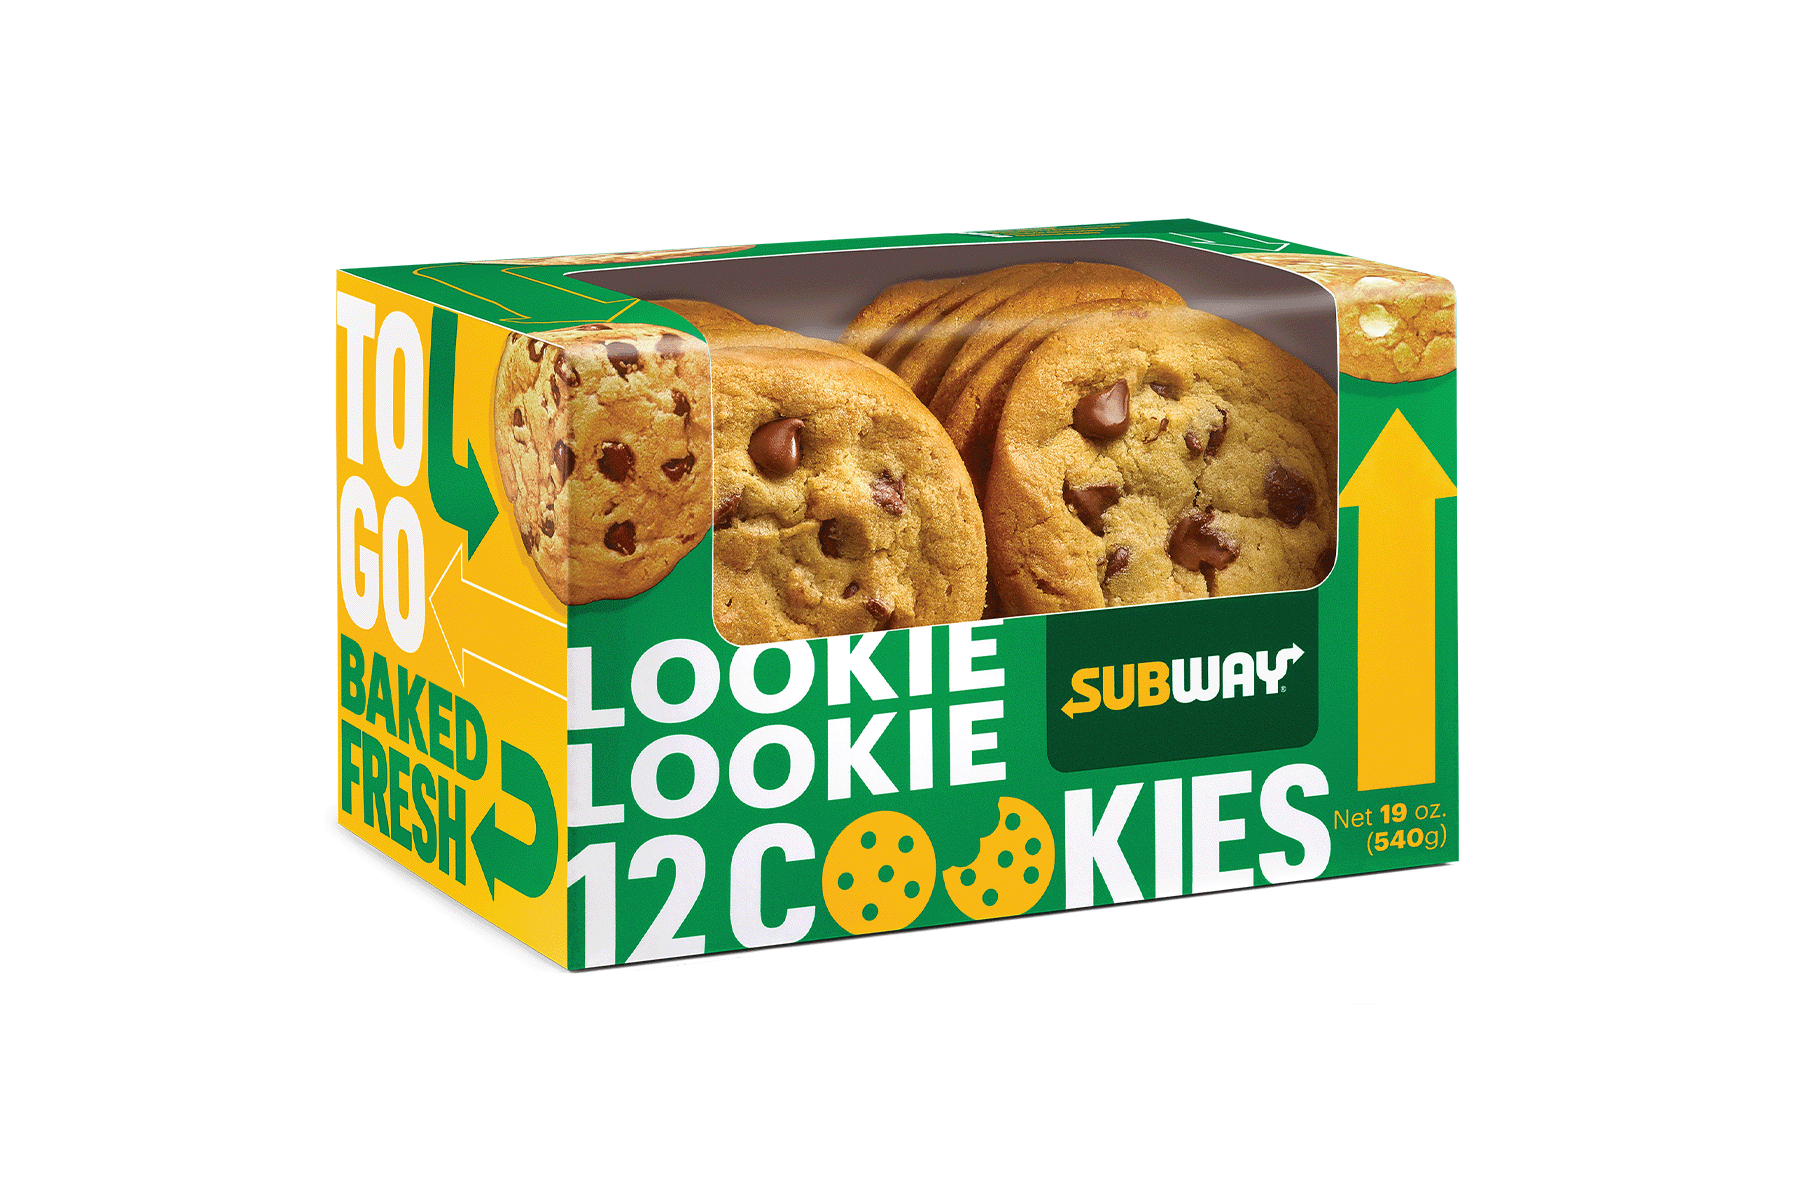 Subway Cookie Bundles are now available at Subway restaurants nationwide, offering a package of six or 12 of Subway’s fan-favorite cookies.